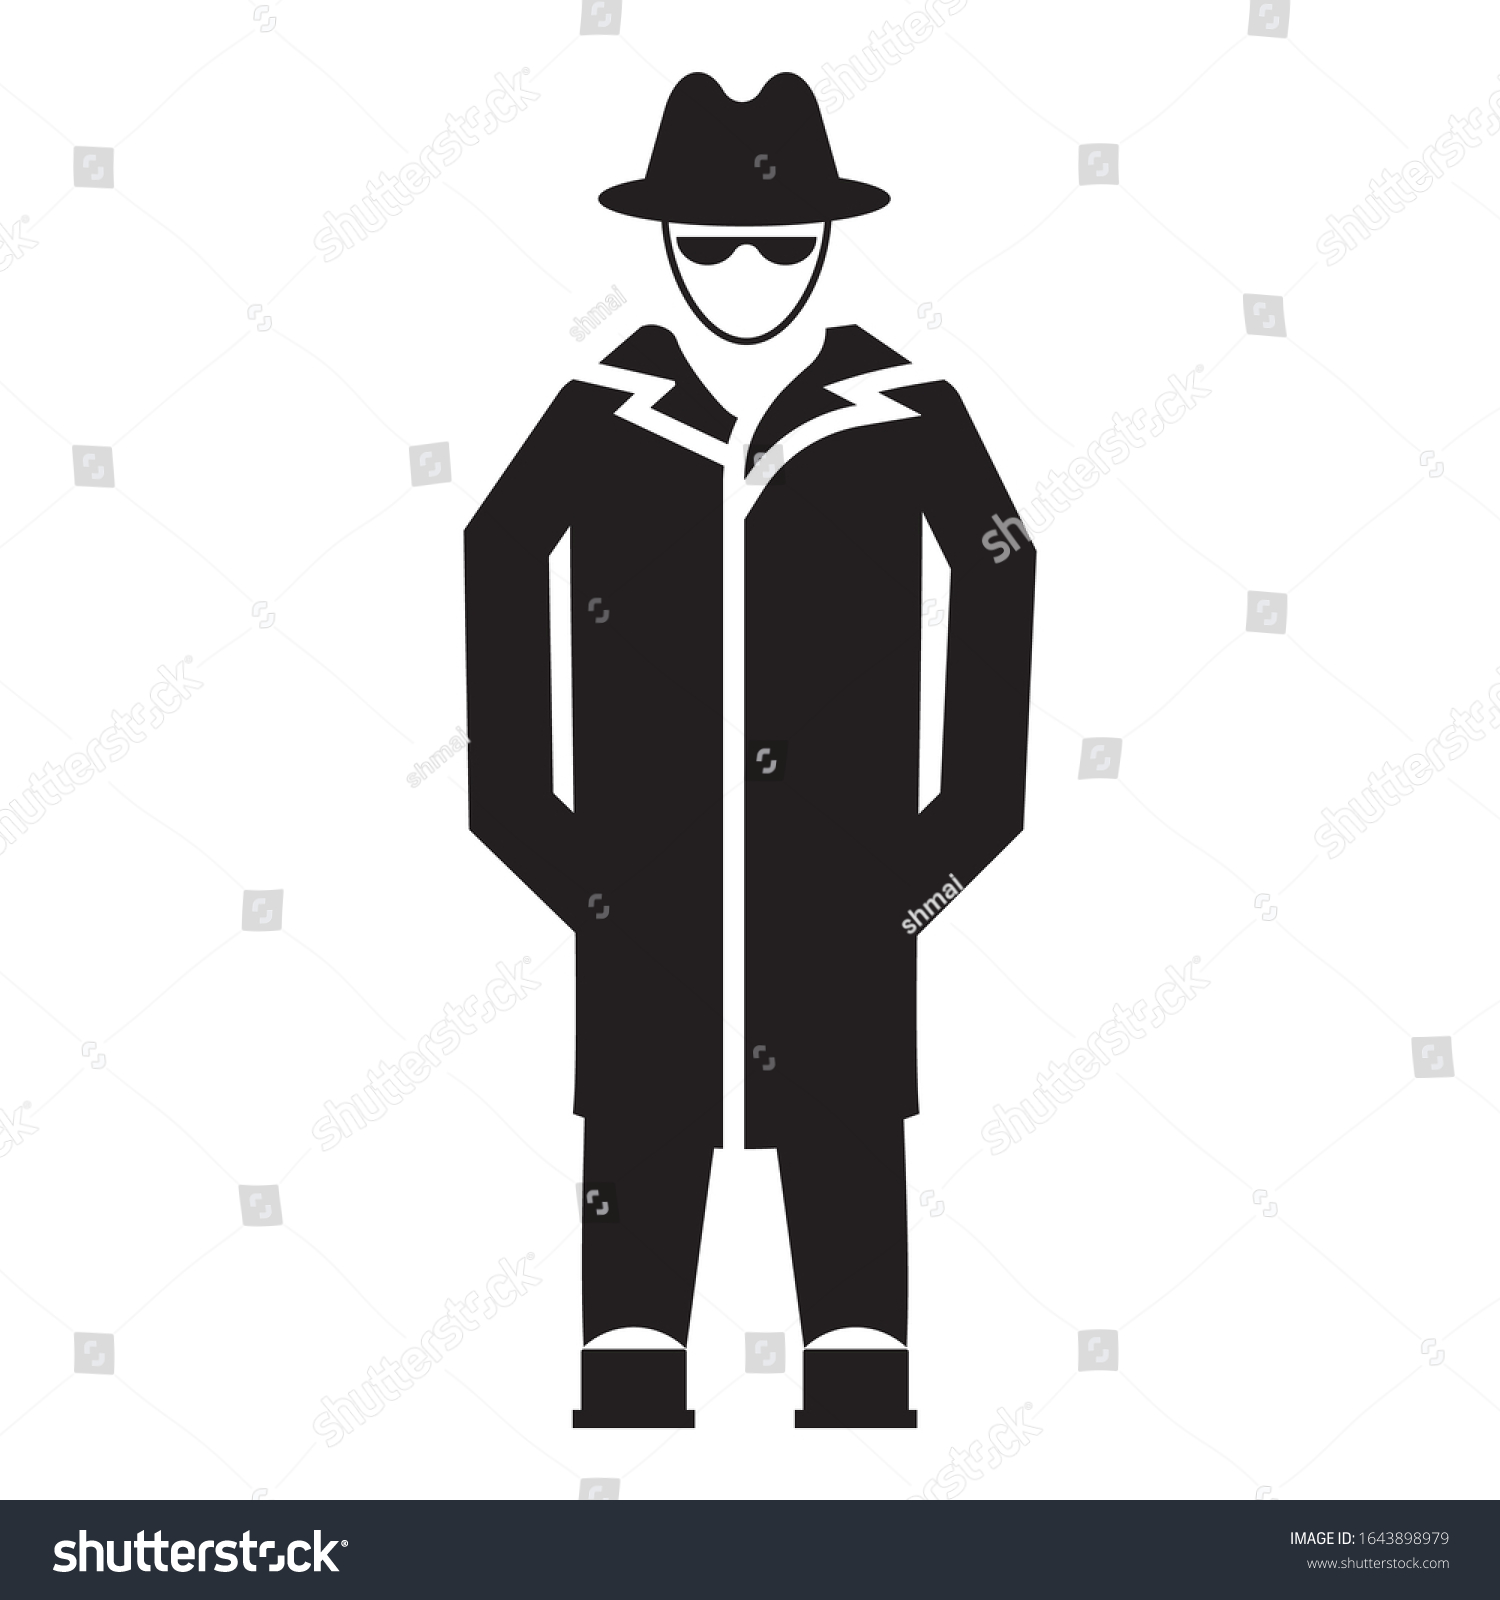 SVG of Private Investigator Avatar Concept, Spy with Long Coat Vector Icon Design svg